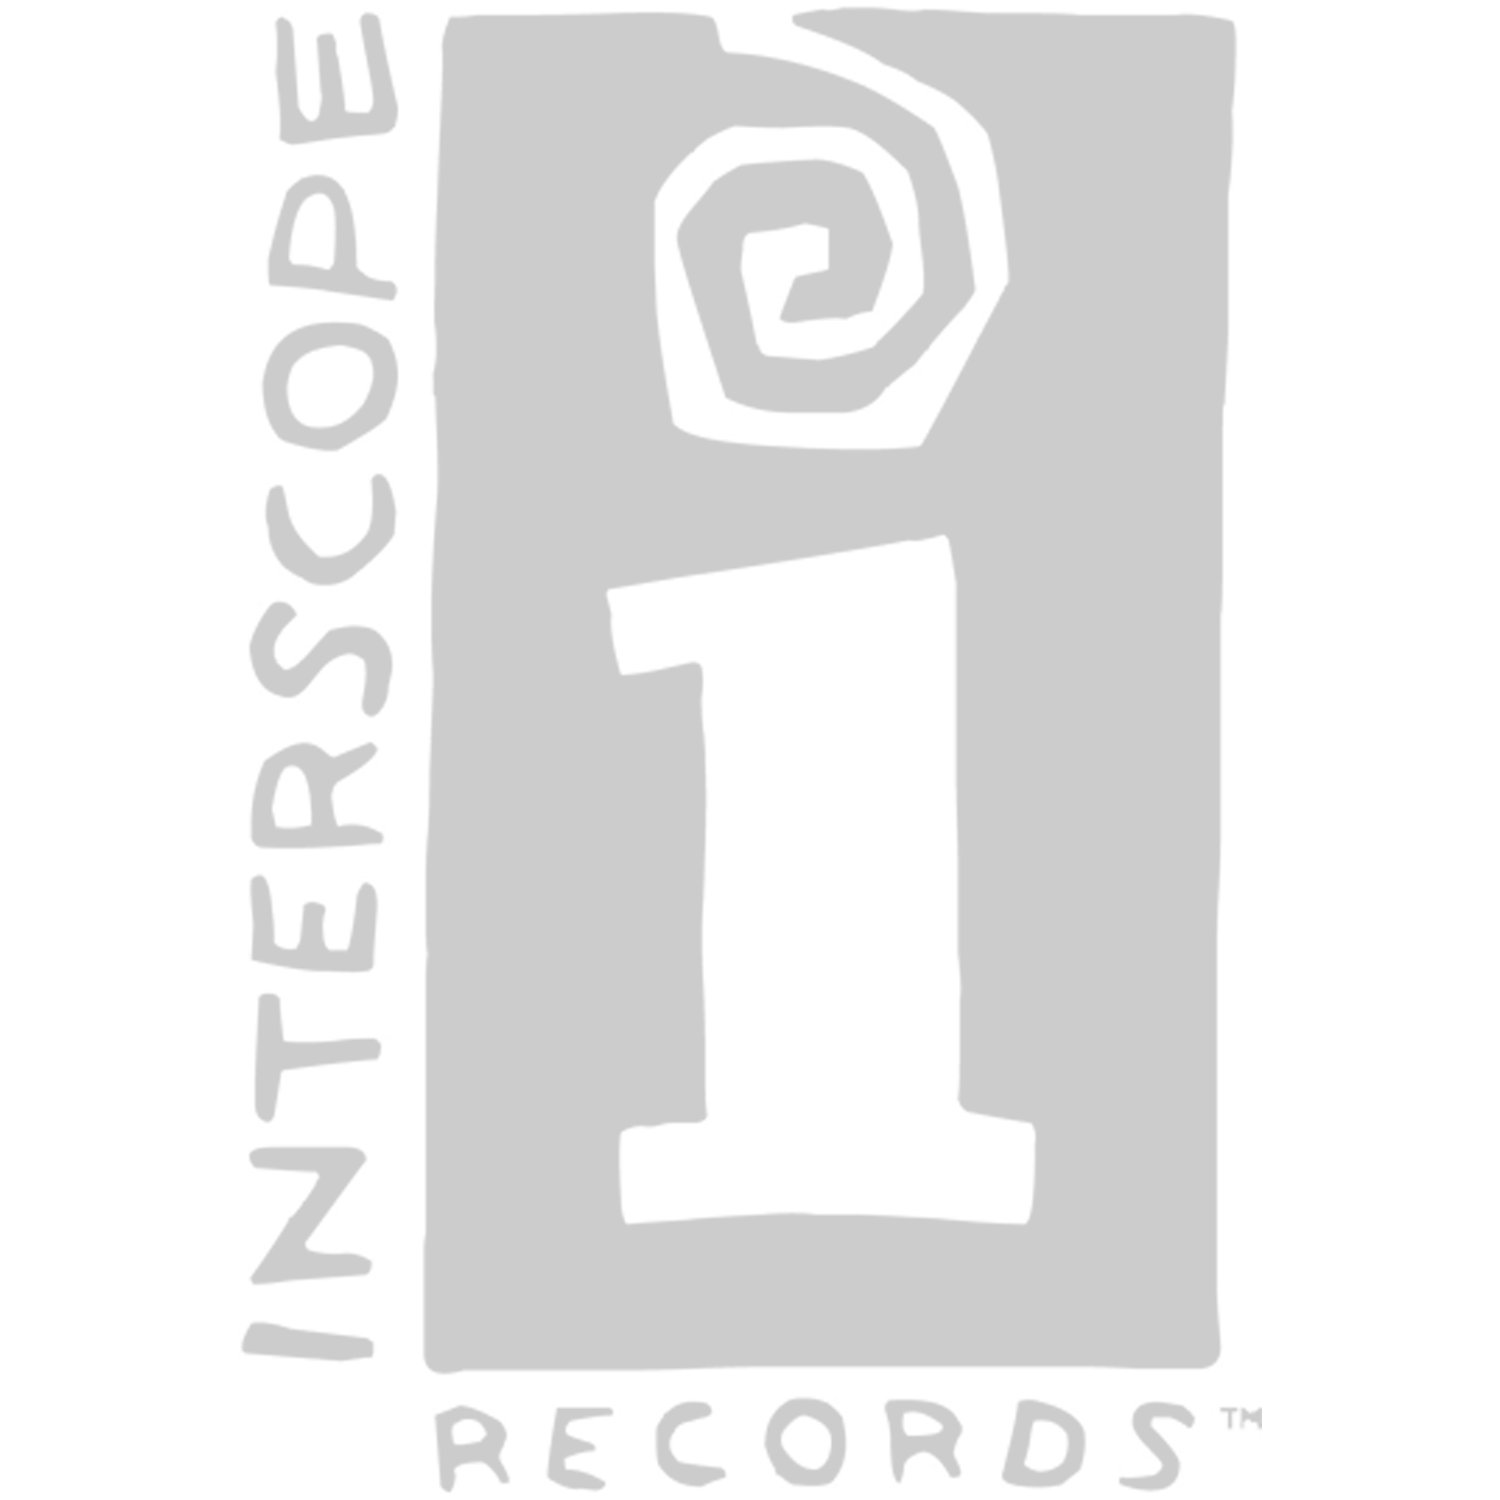 Interscope Records - light.png